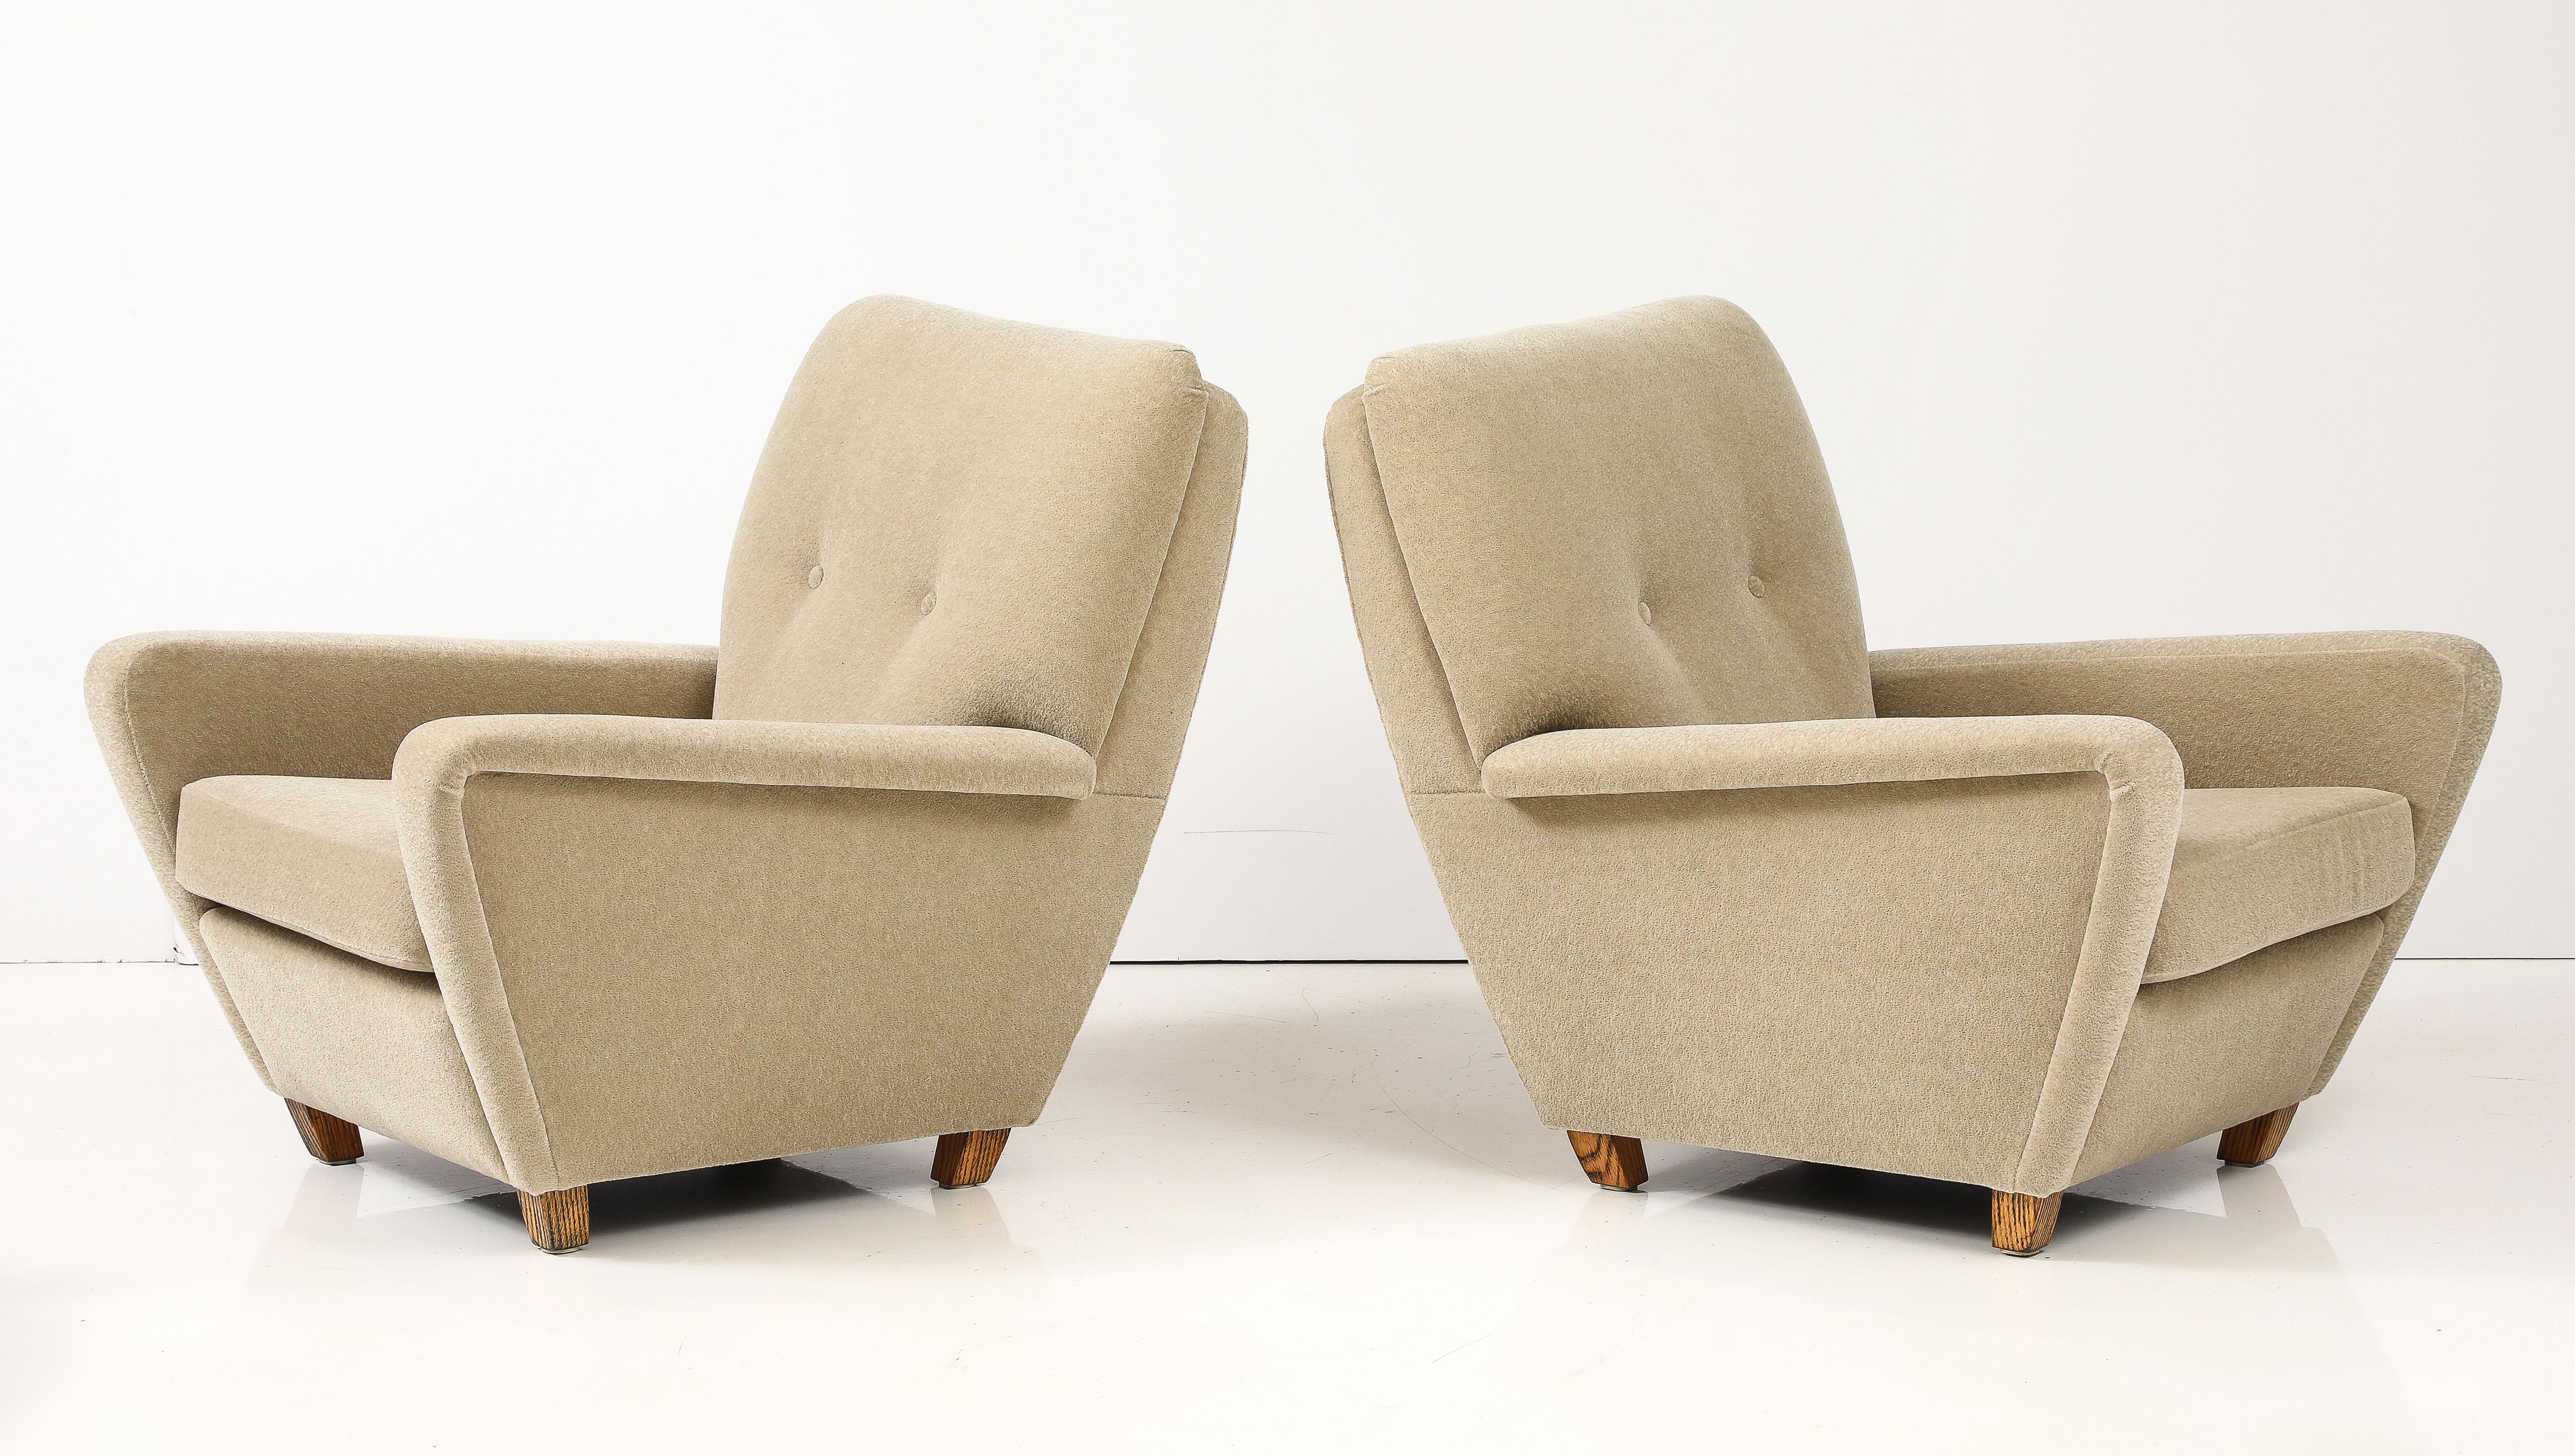 1950's French Lounge Chairs Upholstered In Donghia Mohair Fabric For Sale 6